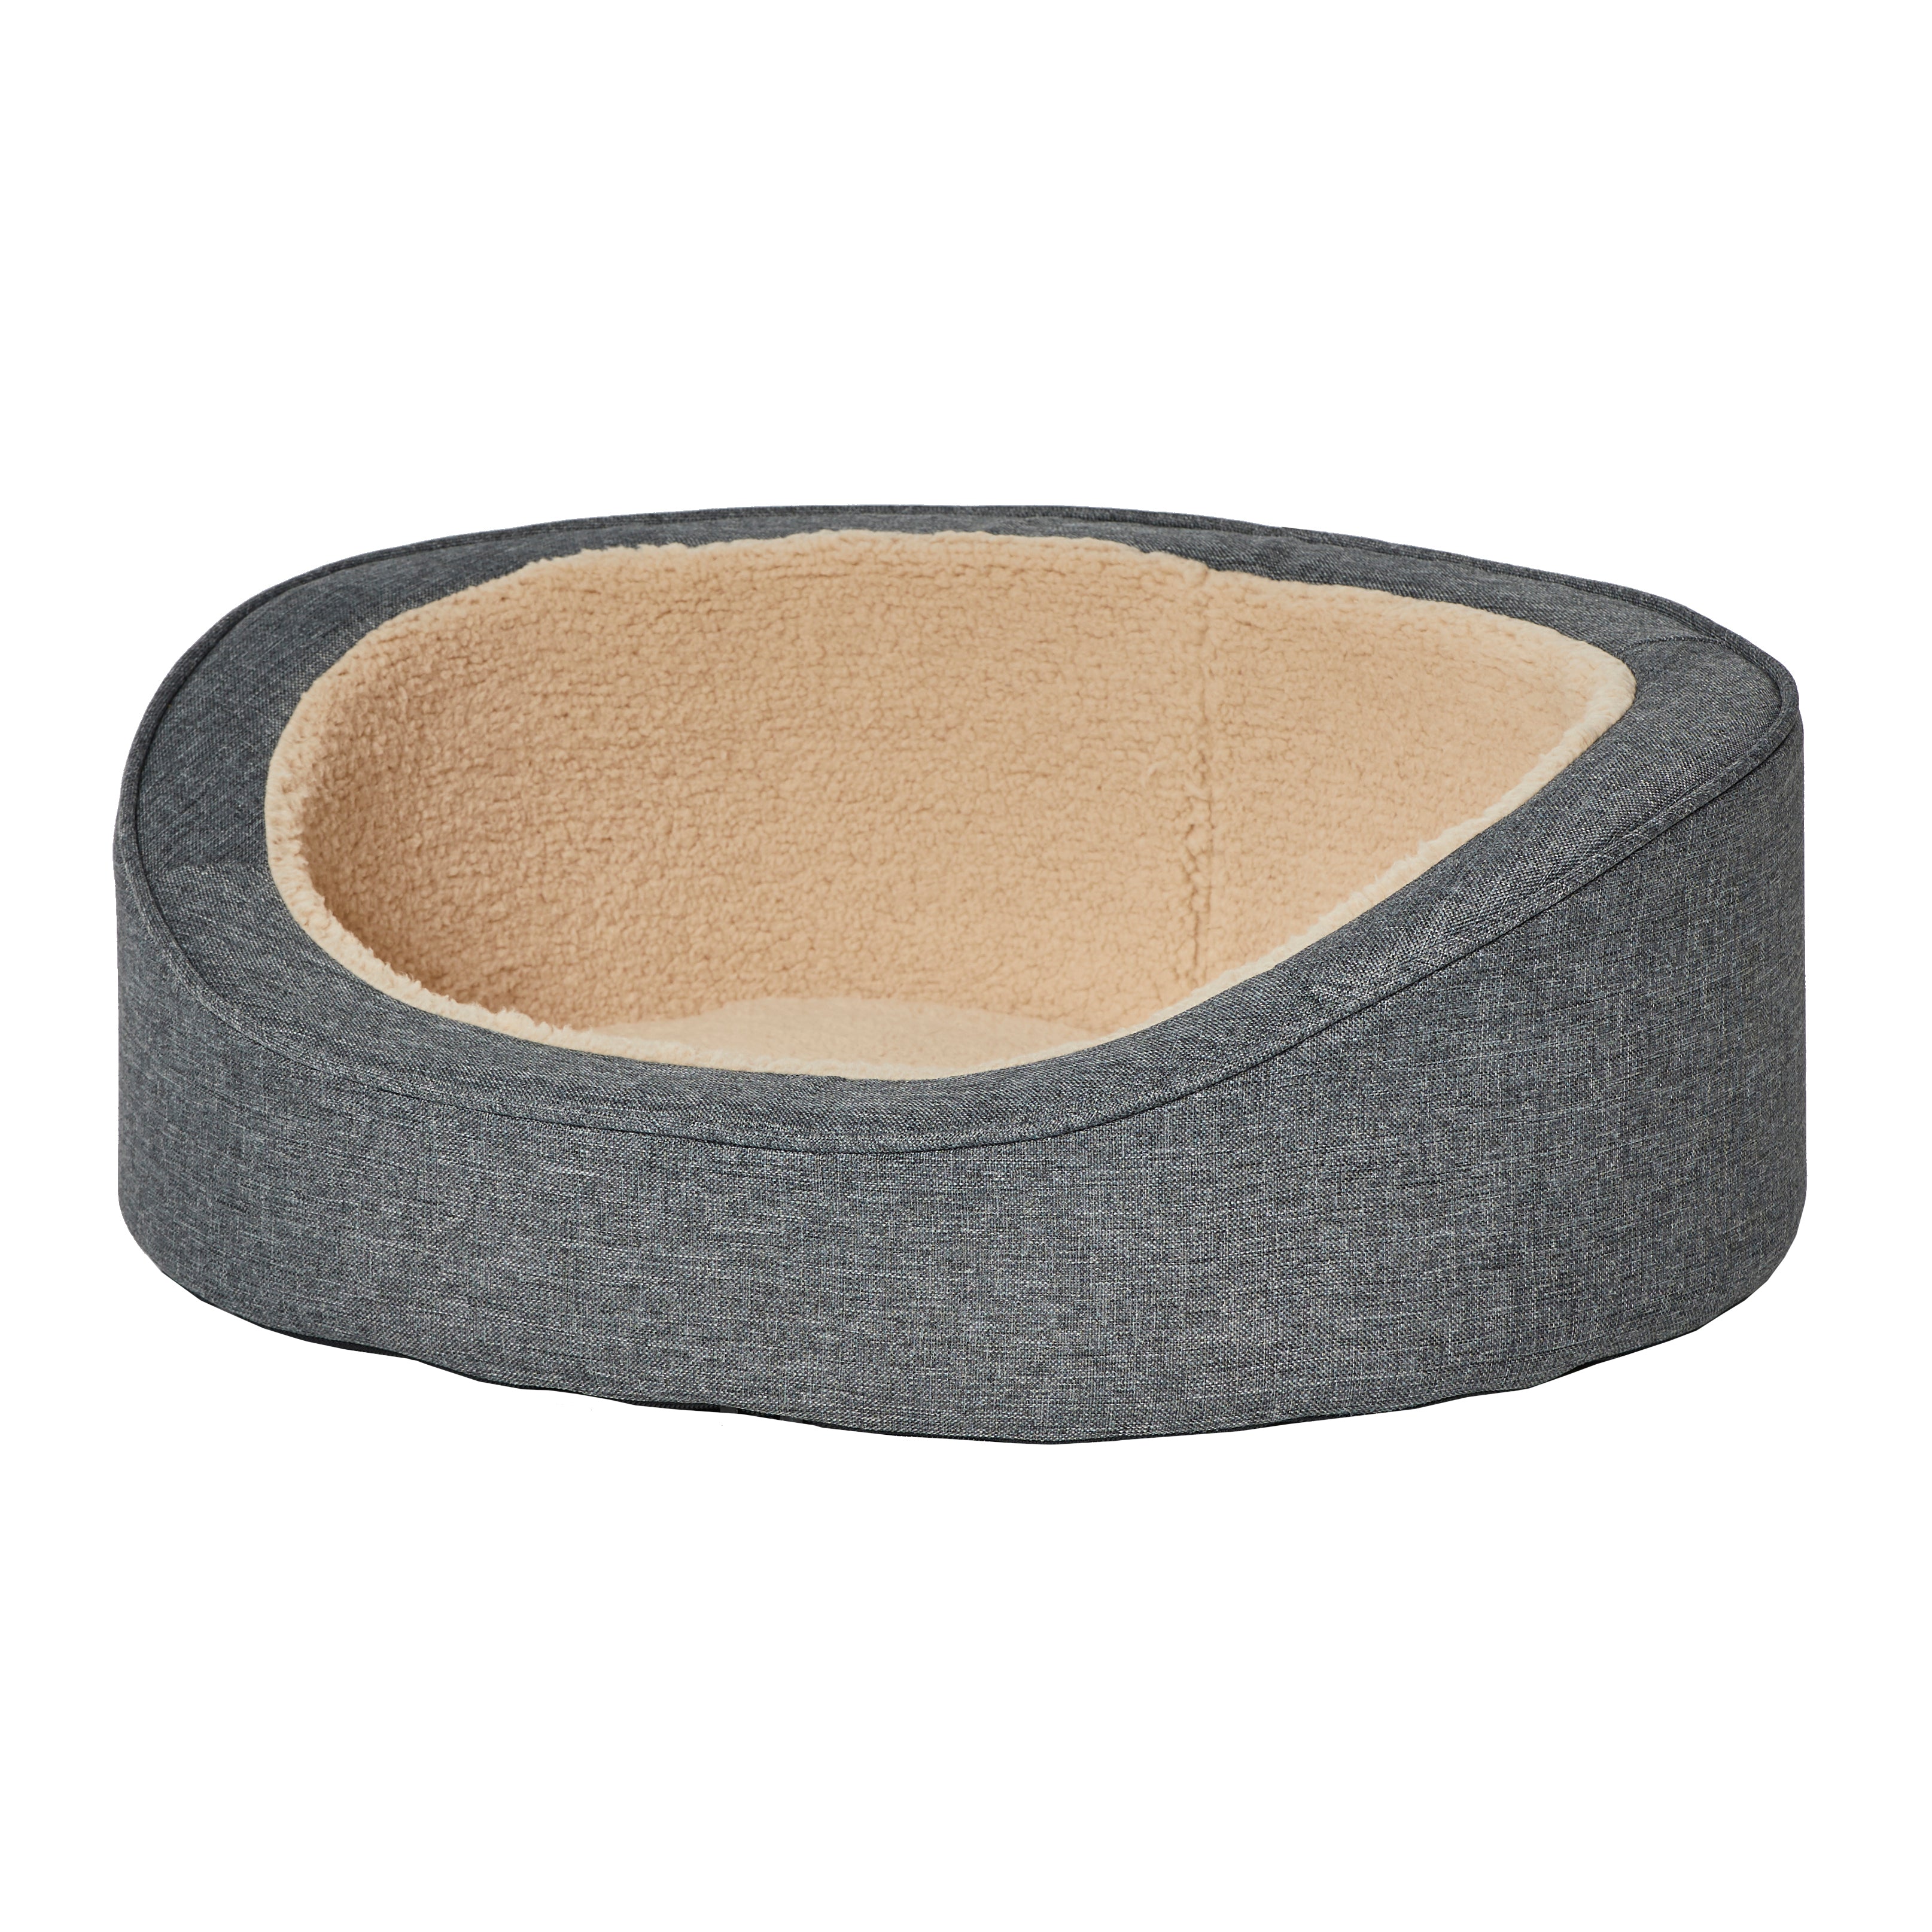 Extra-Small QuietTime Deluxe Hudson Pet Bed- Gray